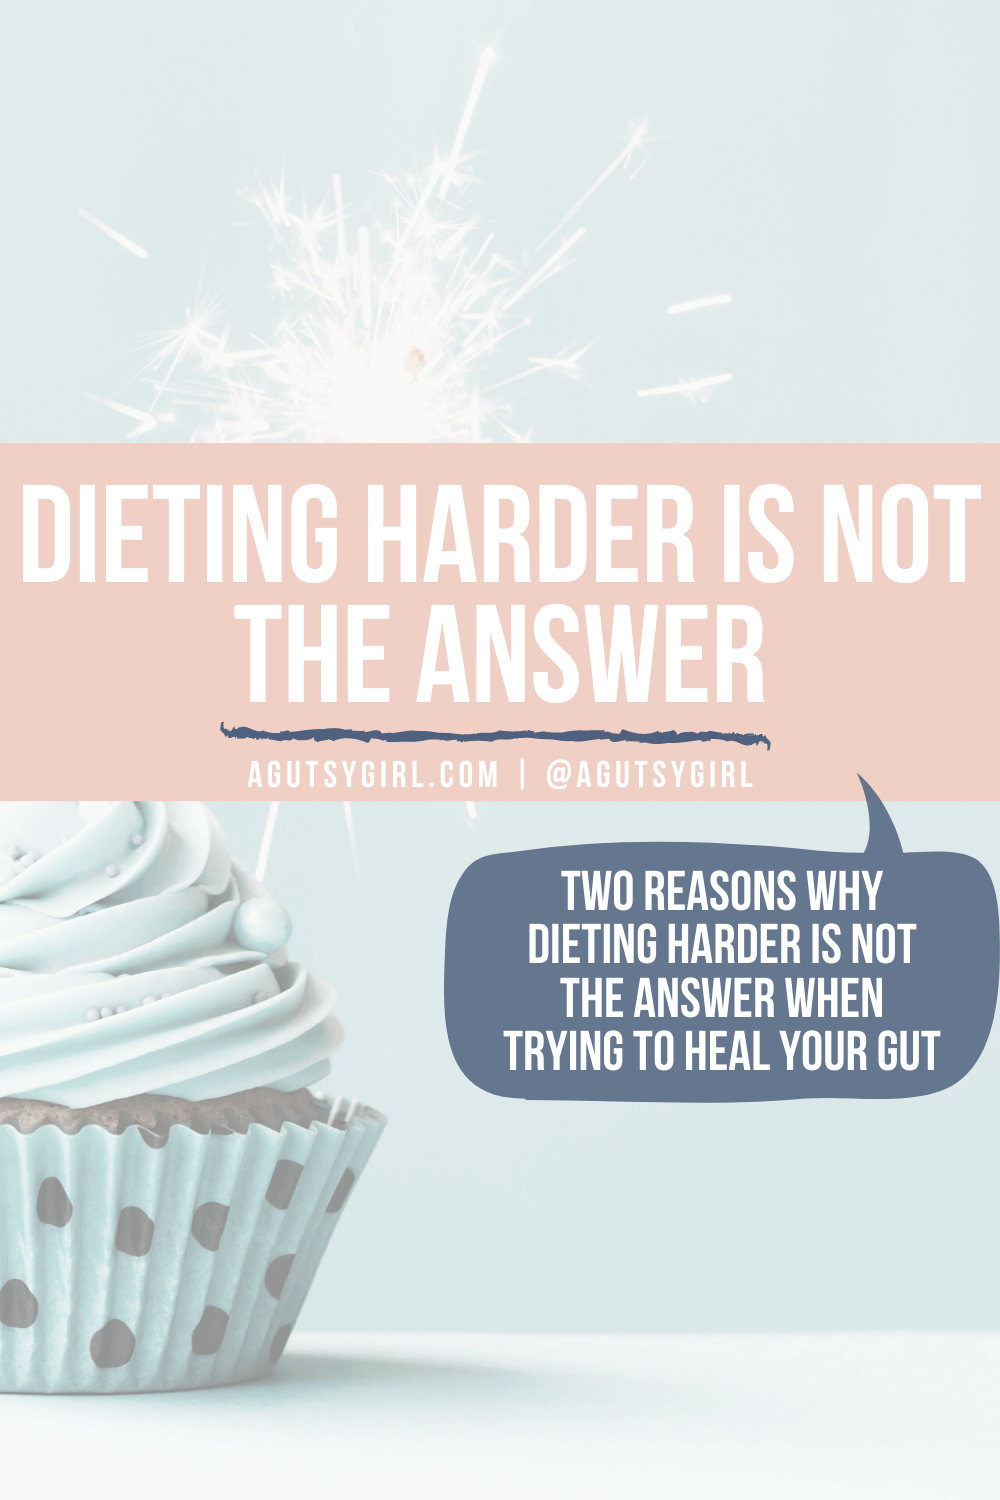 Two reasons why dieting harder is not the answer for gut healing agutsygirl.com #guthealth #inspiring #healingjourney